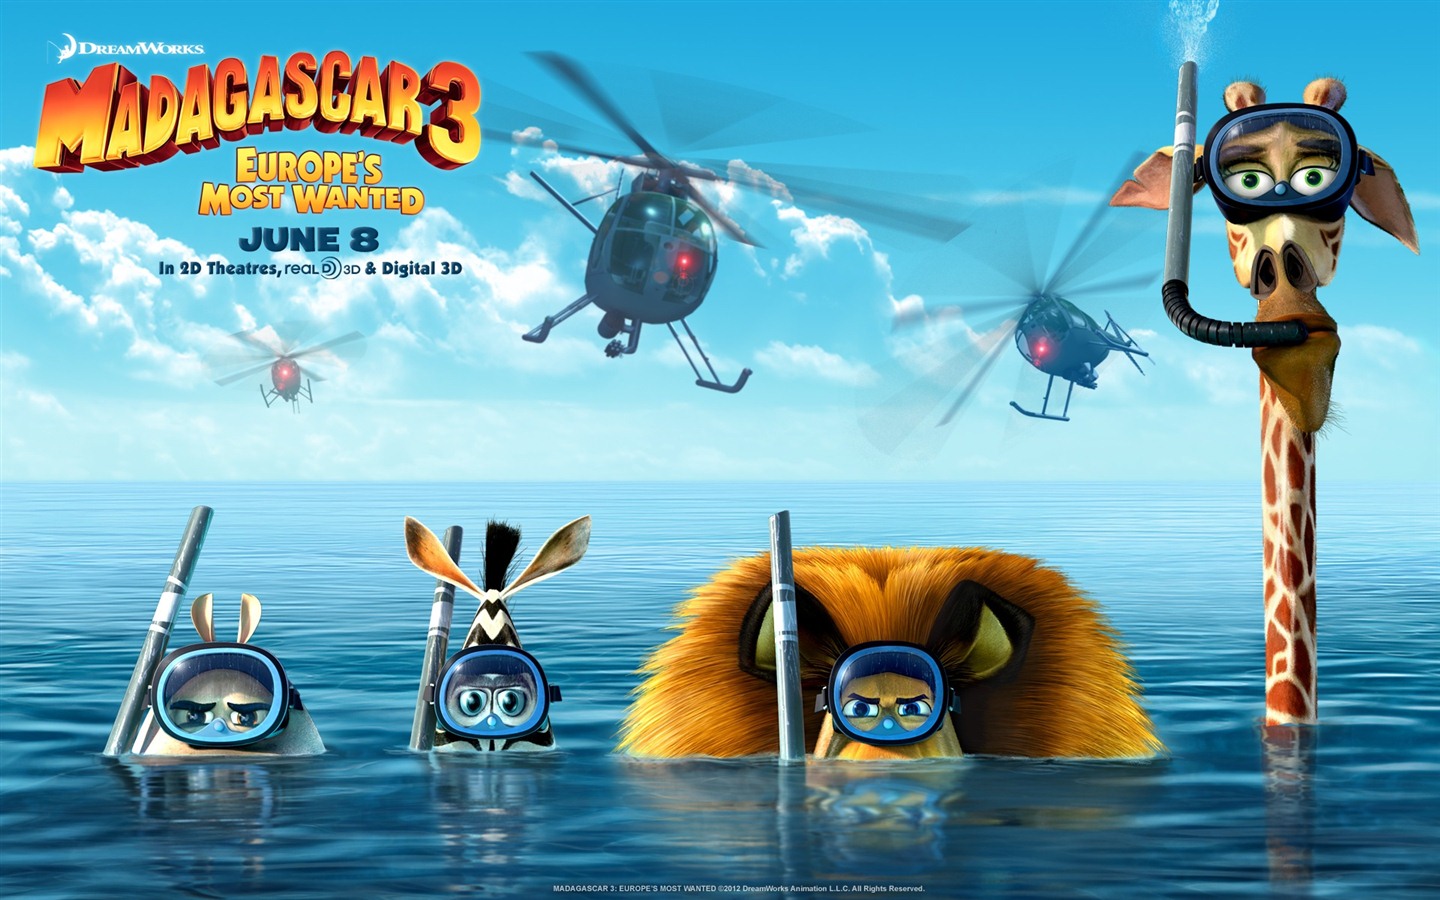 Madagascar 3: Europe's Most Wanted HD wallpapers #10 - 1440x900